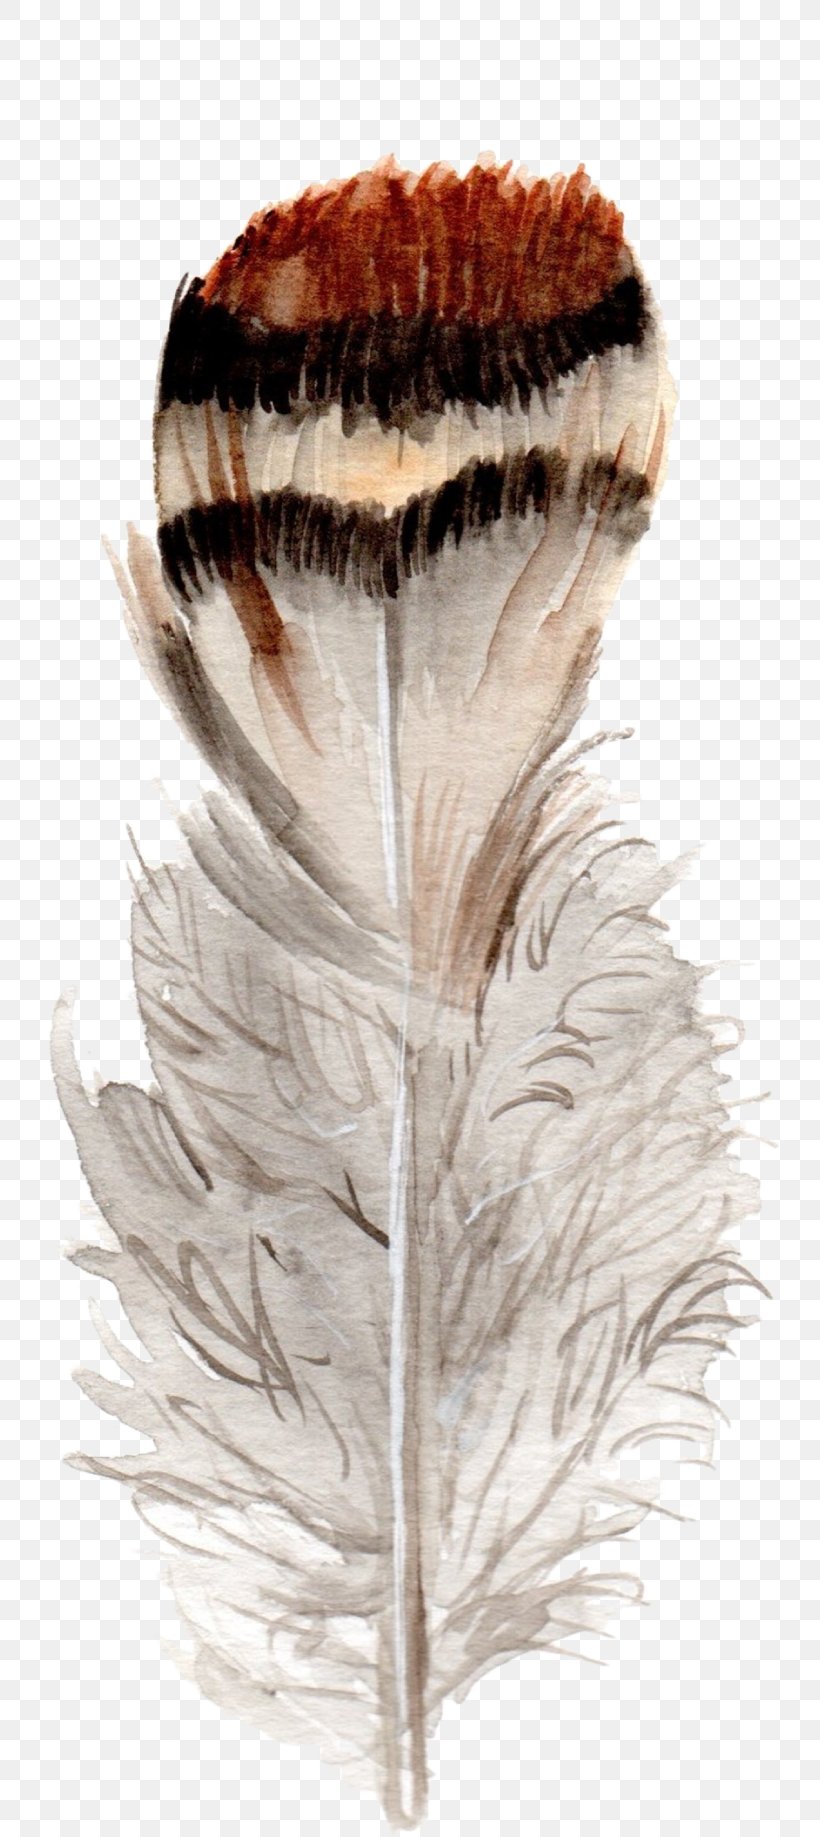 Feather Bird Watercolor Painting Clip Art, PNG, 763x1837px, Feather, Bird, Color, Flight Feather, Painting Download Free